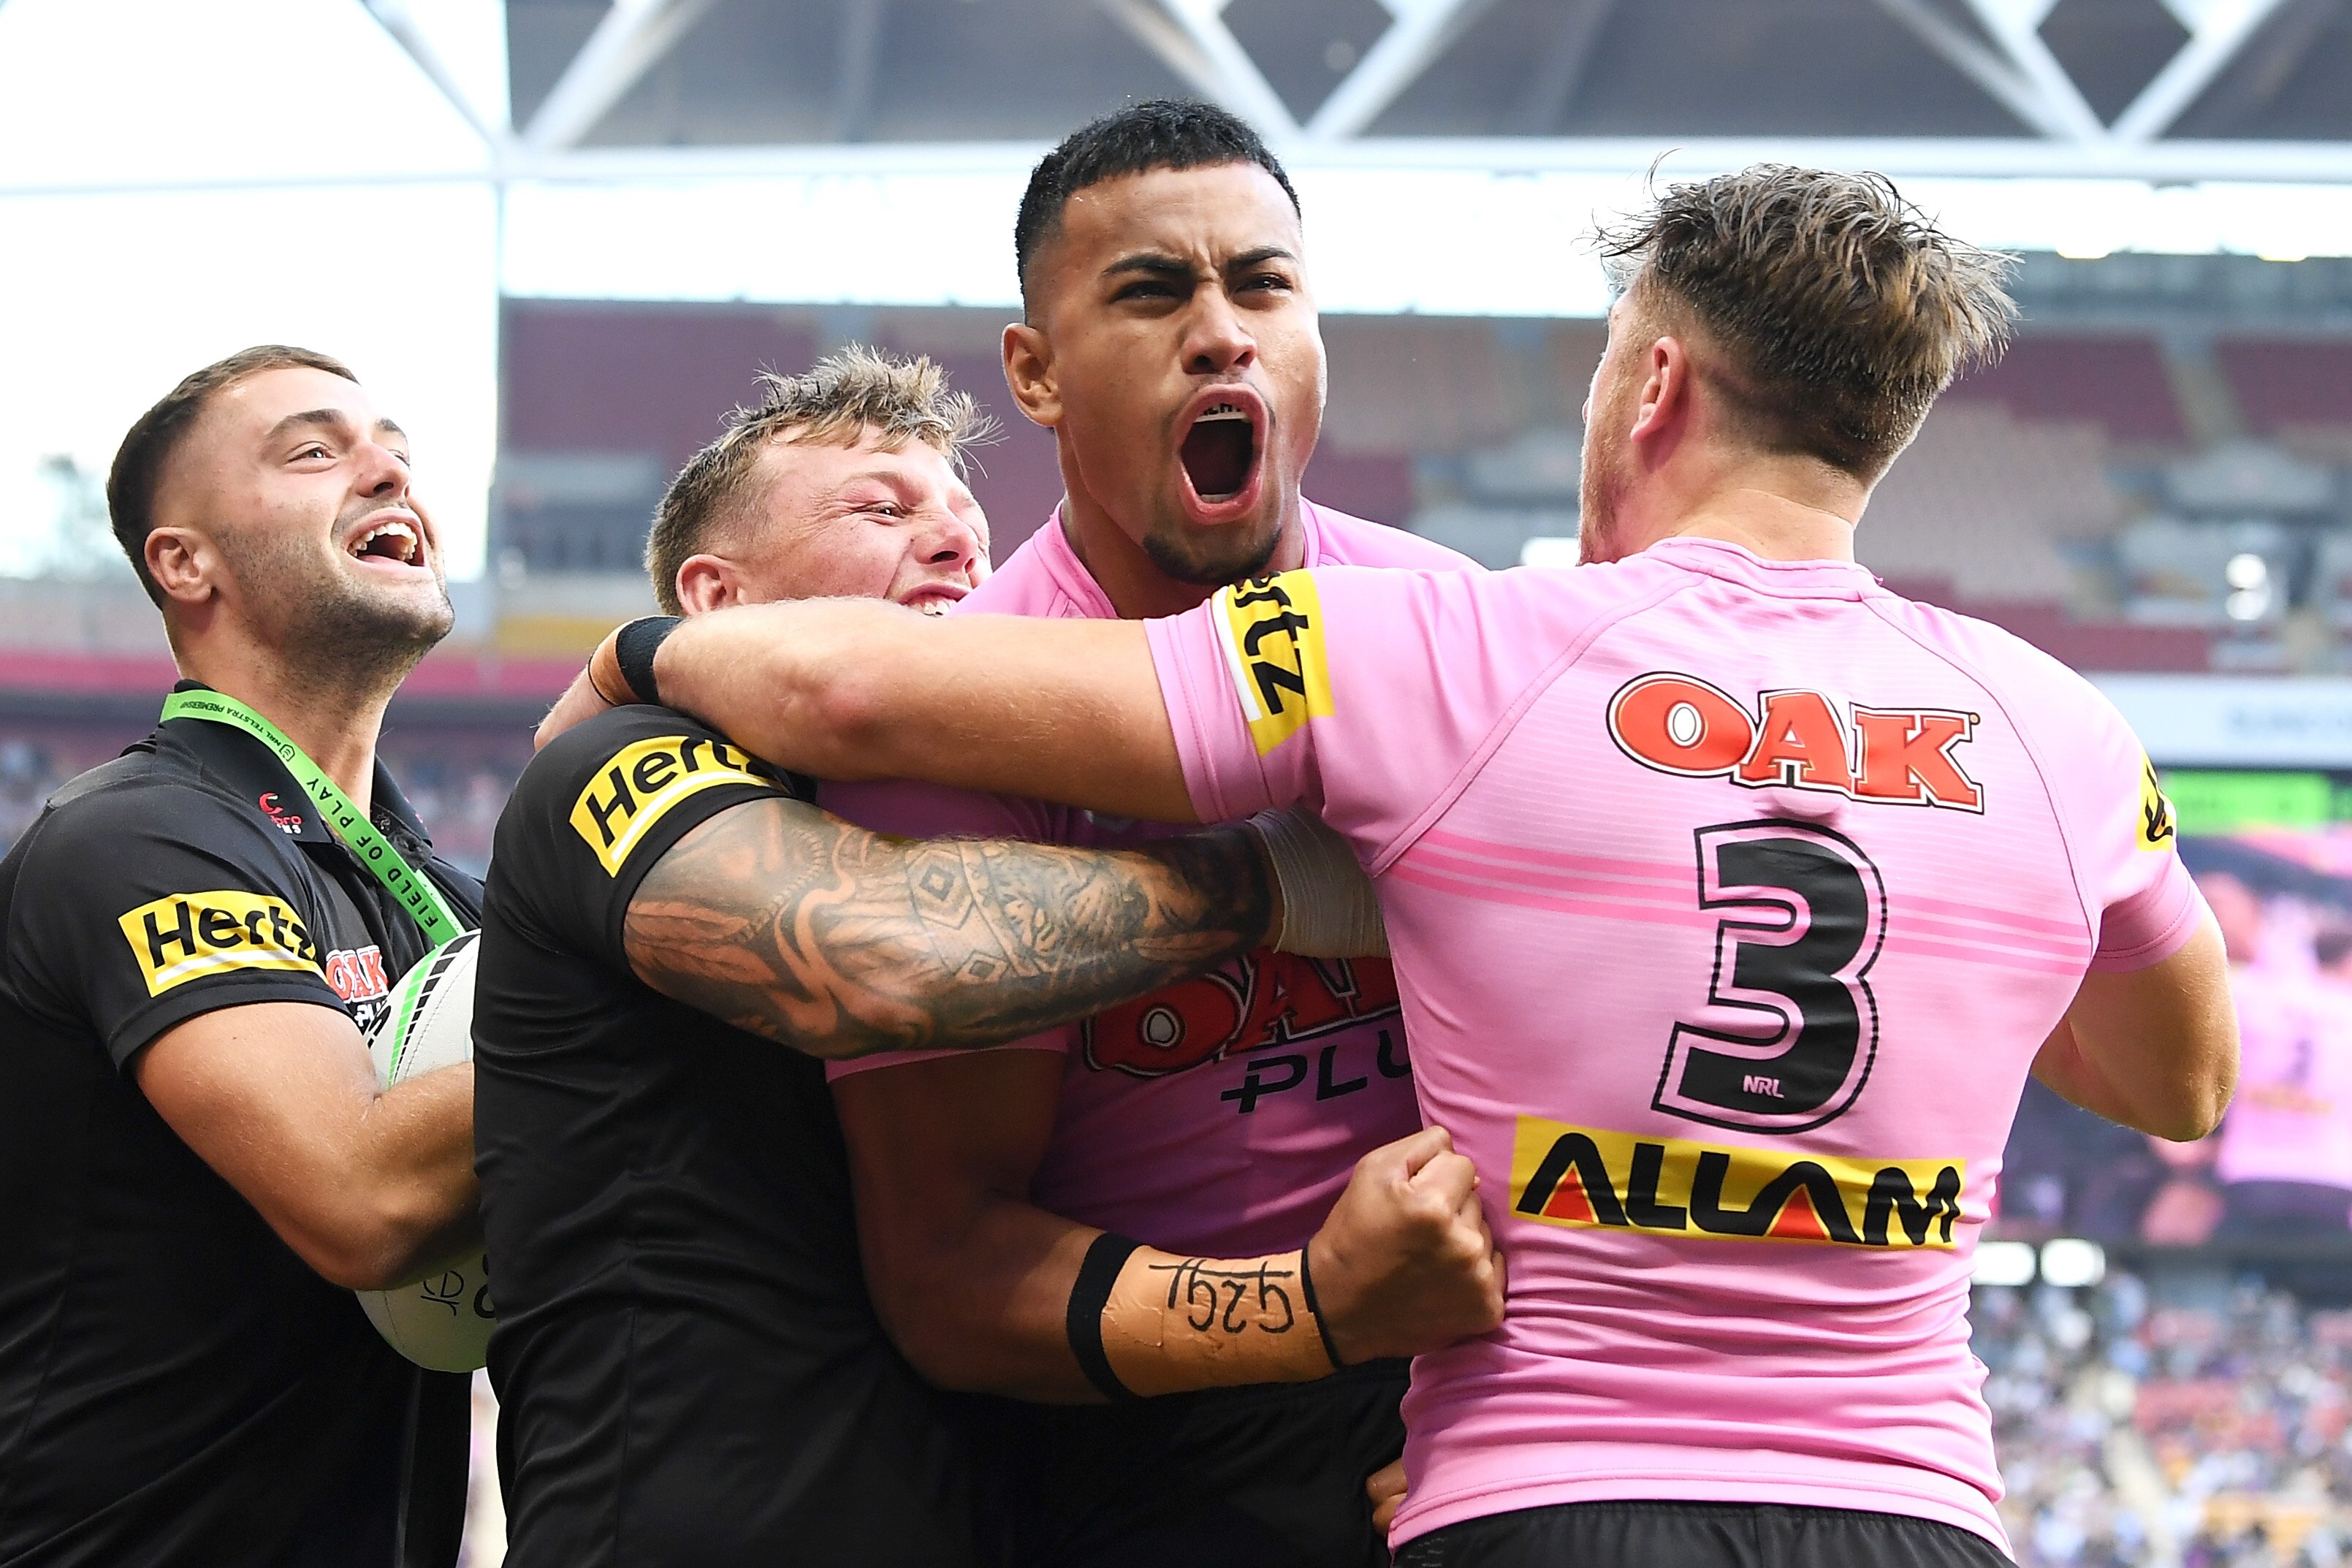 Penrith Panthers beat Melbourne Storm 10-6 to reach second straight NRL grand final, will face South Sydney Rabbitohs